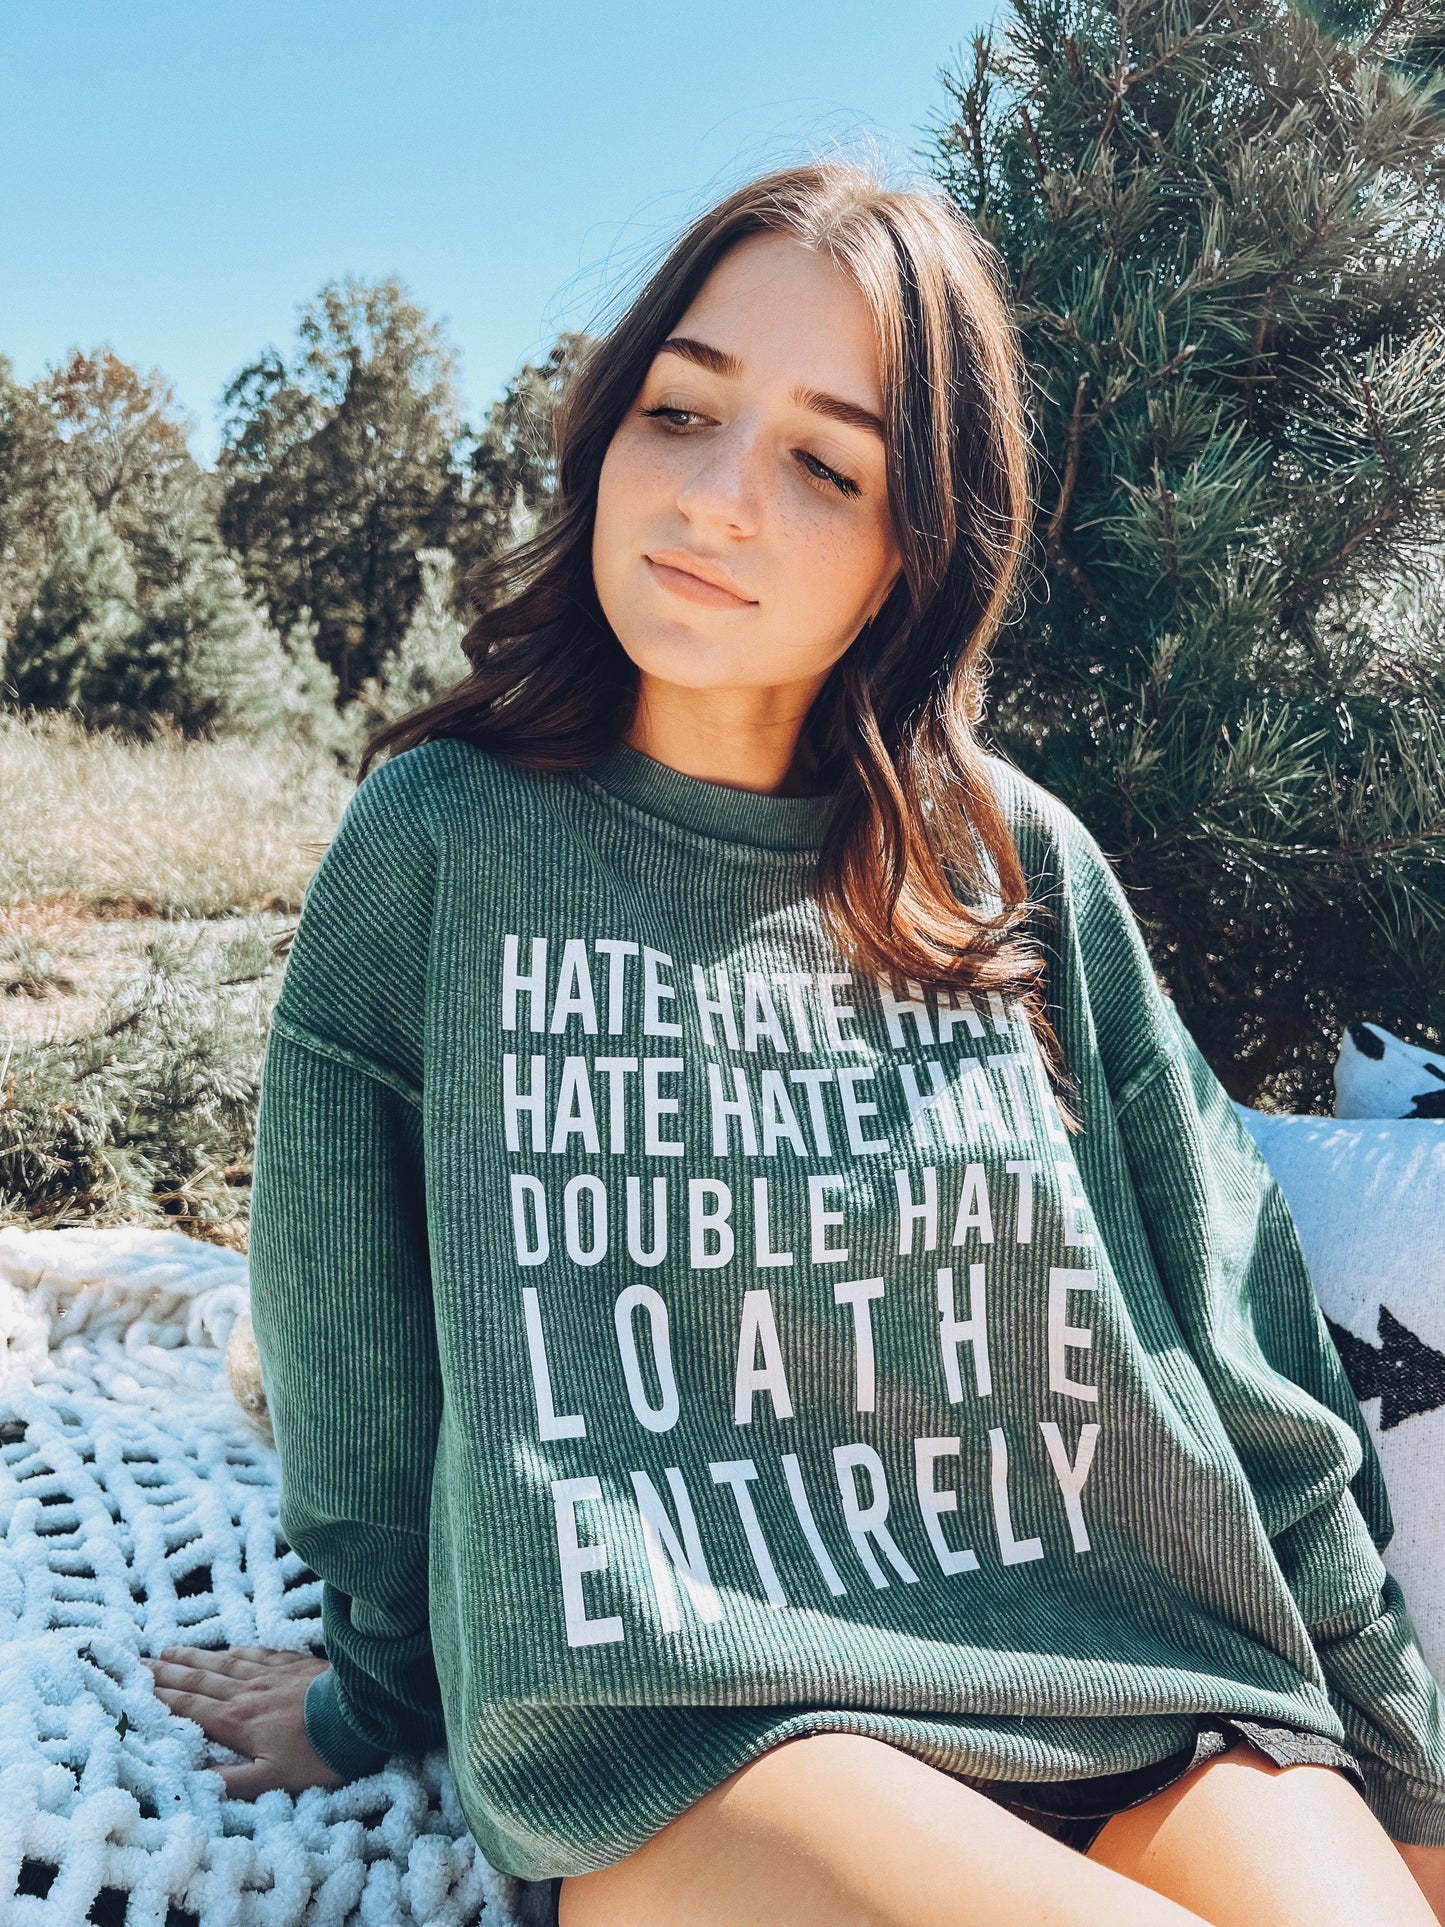 Loathe entirely grinch corded pullover